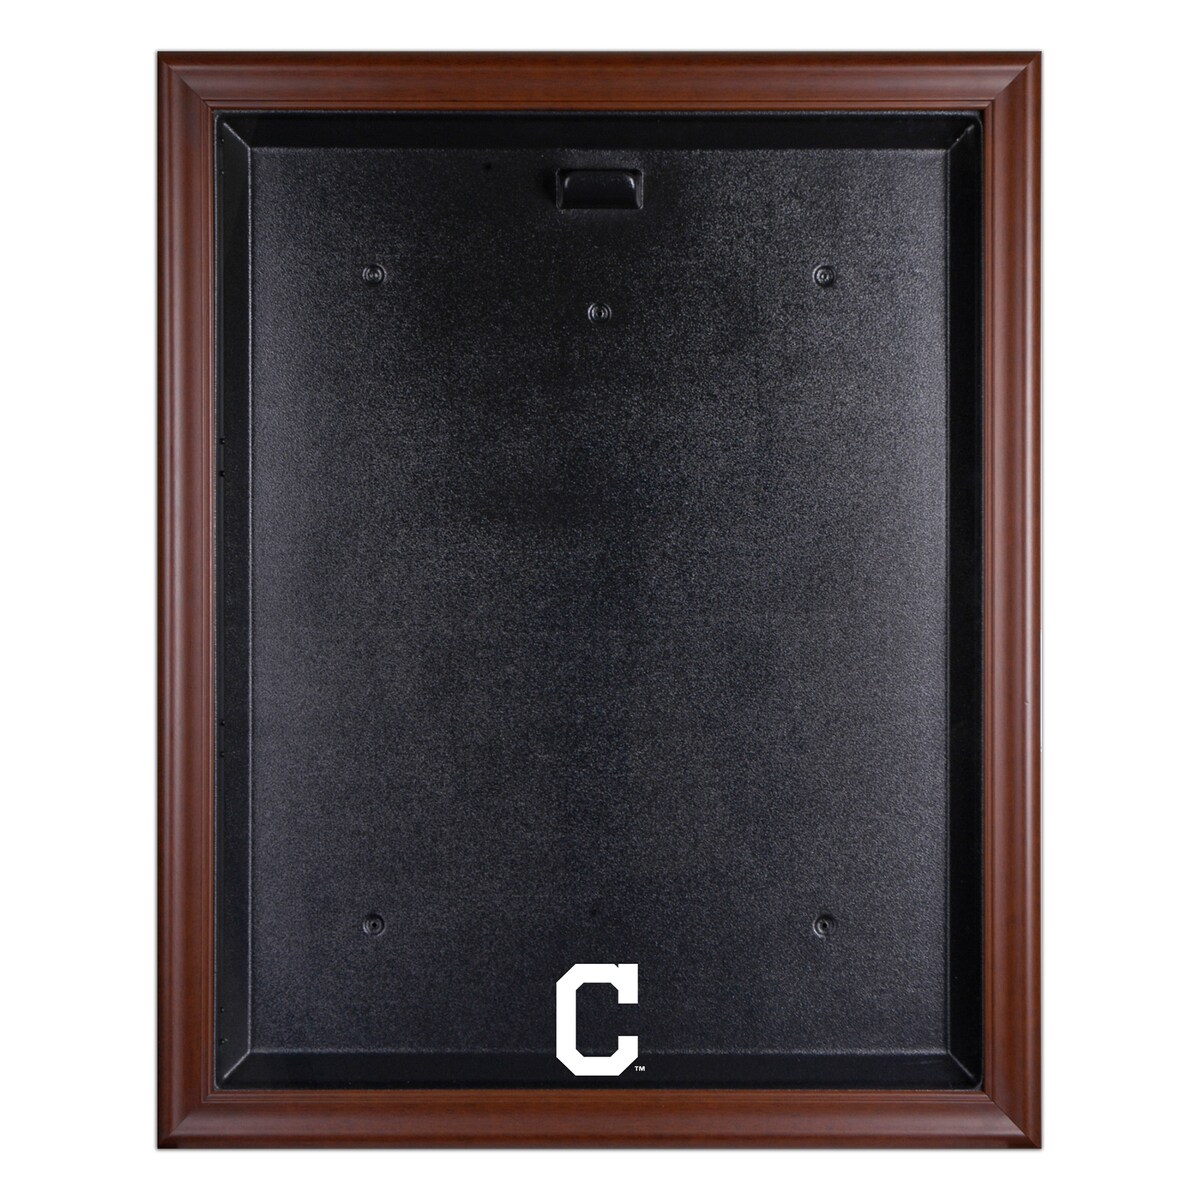 The Cleveland Indians brown framed logo jersey display case opens on hinges and is easily wall-mounted. It comes with a 24" clear acrylic rod to display a collectible jersey. It comes constructed with a durable, high-strength injection mold backing, encased by a beautiful wood frame and an engraved team logo on the front. Officially licensed by Major League Baseball. The inner dimensions of the case are 38" x 29 1/2"x 3" with the outer measurements of 42" x 34 1/2" x 3 1/2". Memorabilia sold separately.Officially licensed MLB productIncludes acrylic rod to hold jerseyHas a LogoWood frameHinges to open easilyOfficially licensedEasily wall mountedCollectible jersey display caseMemorabilia sold separatelyImportedEngraved team graphicsMade in the U.S.A.Brand: Fanatics Authentic